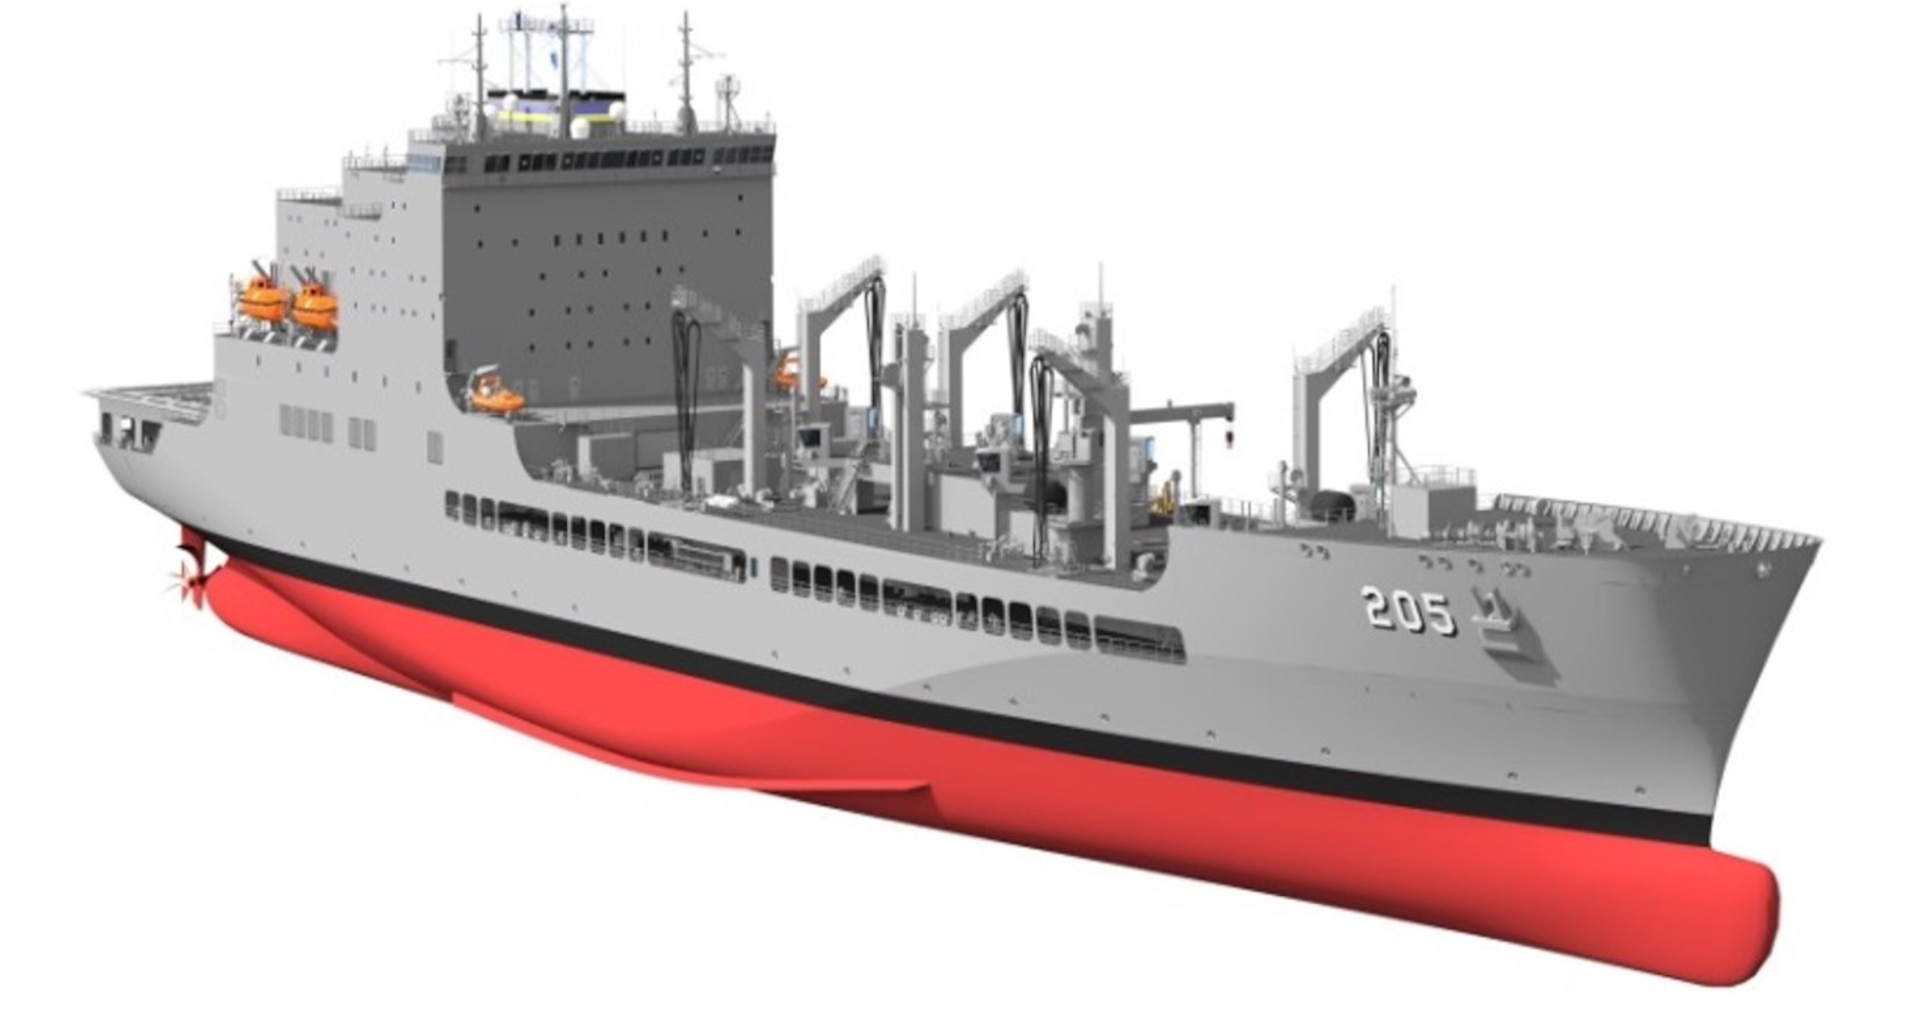 Artist's rendering of the future USNS John Lewis (T-AO 205), courtesy General Dynamics - National Steel and Shipbuilding Co.